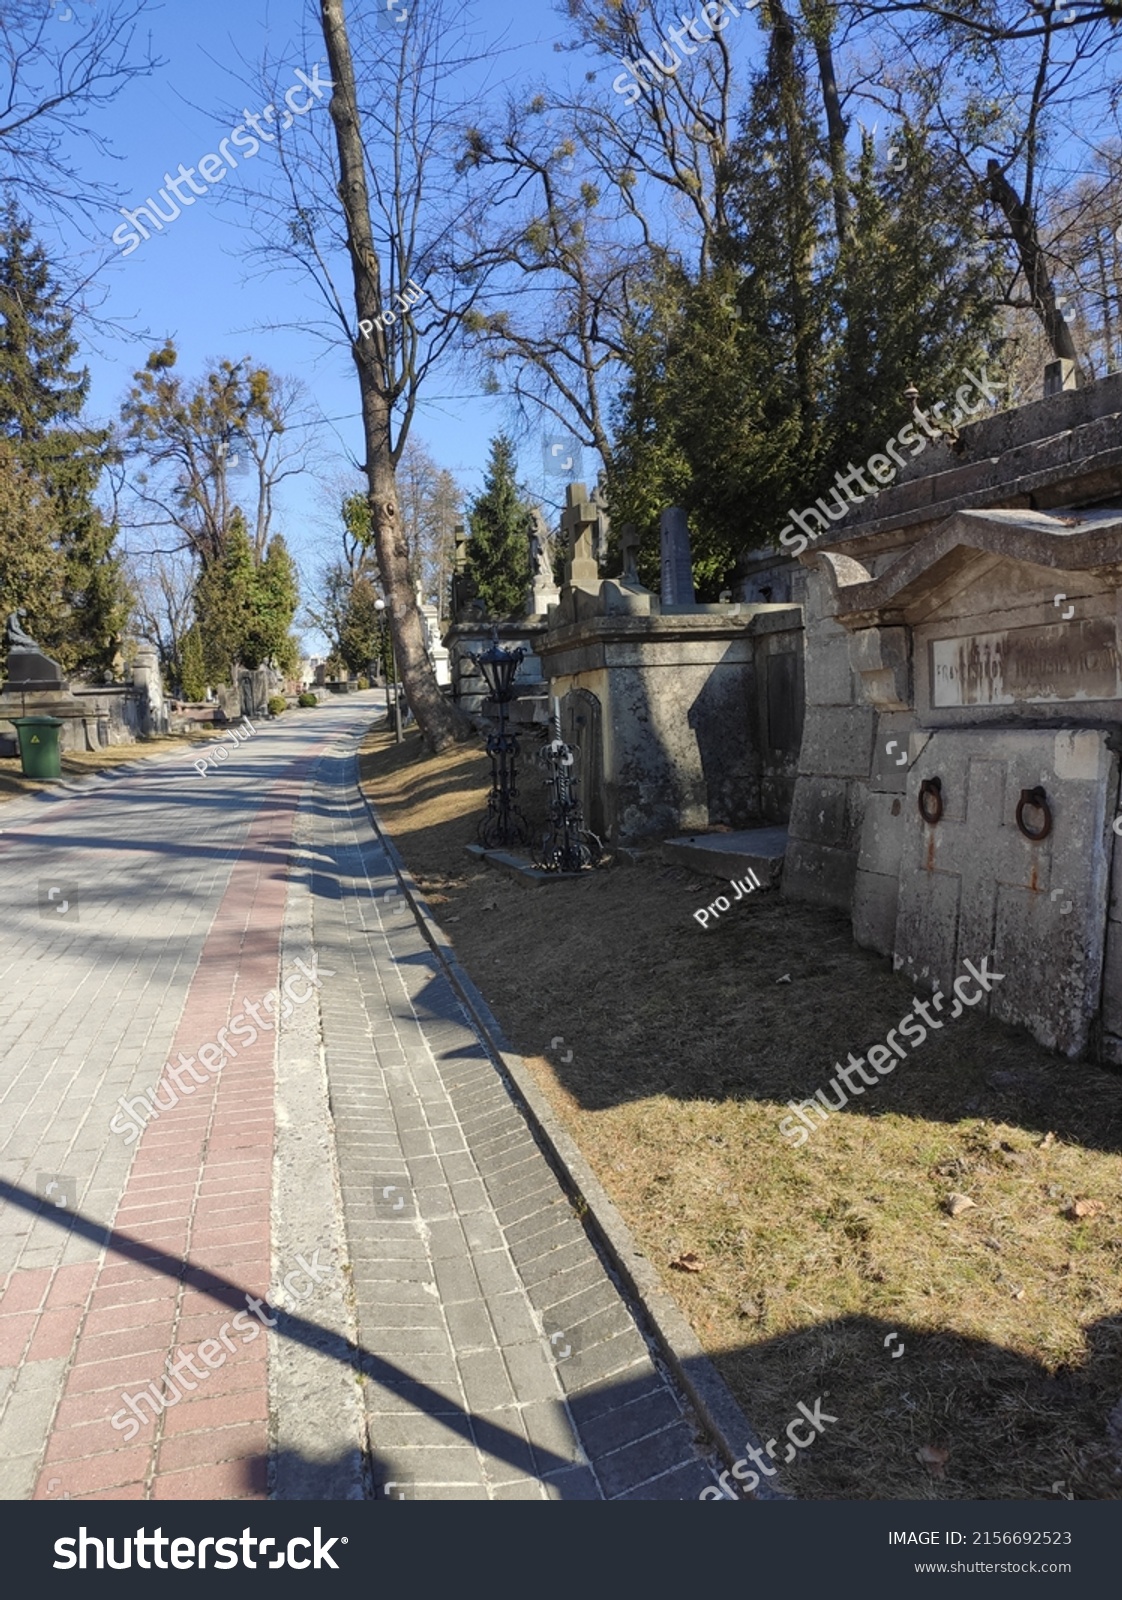 Lychakiv cemetery. Tombstones and graves in the cemetery. City cemetery. Ancient burial places with statues and monuments. Catholic cemetery, family crypt. Polish and Ukrainian cemeteries #2156692523